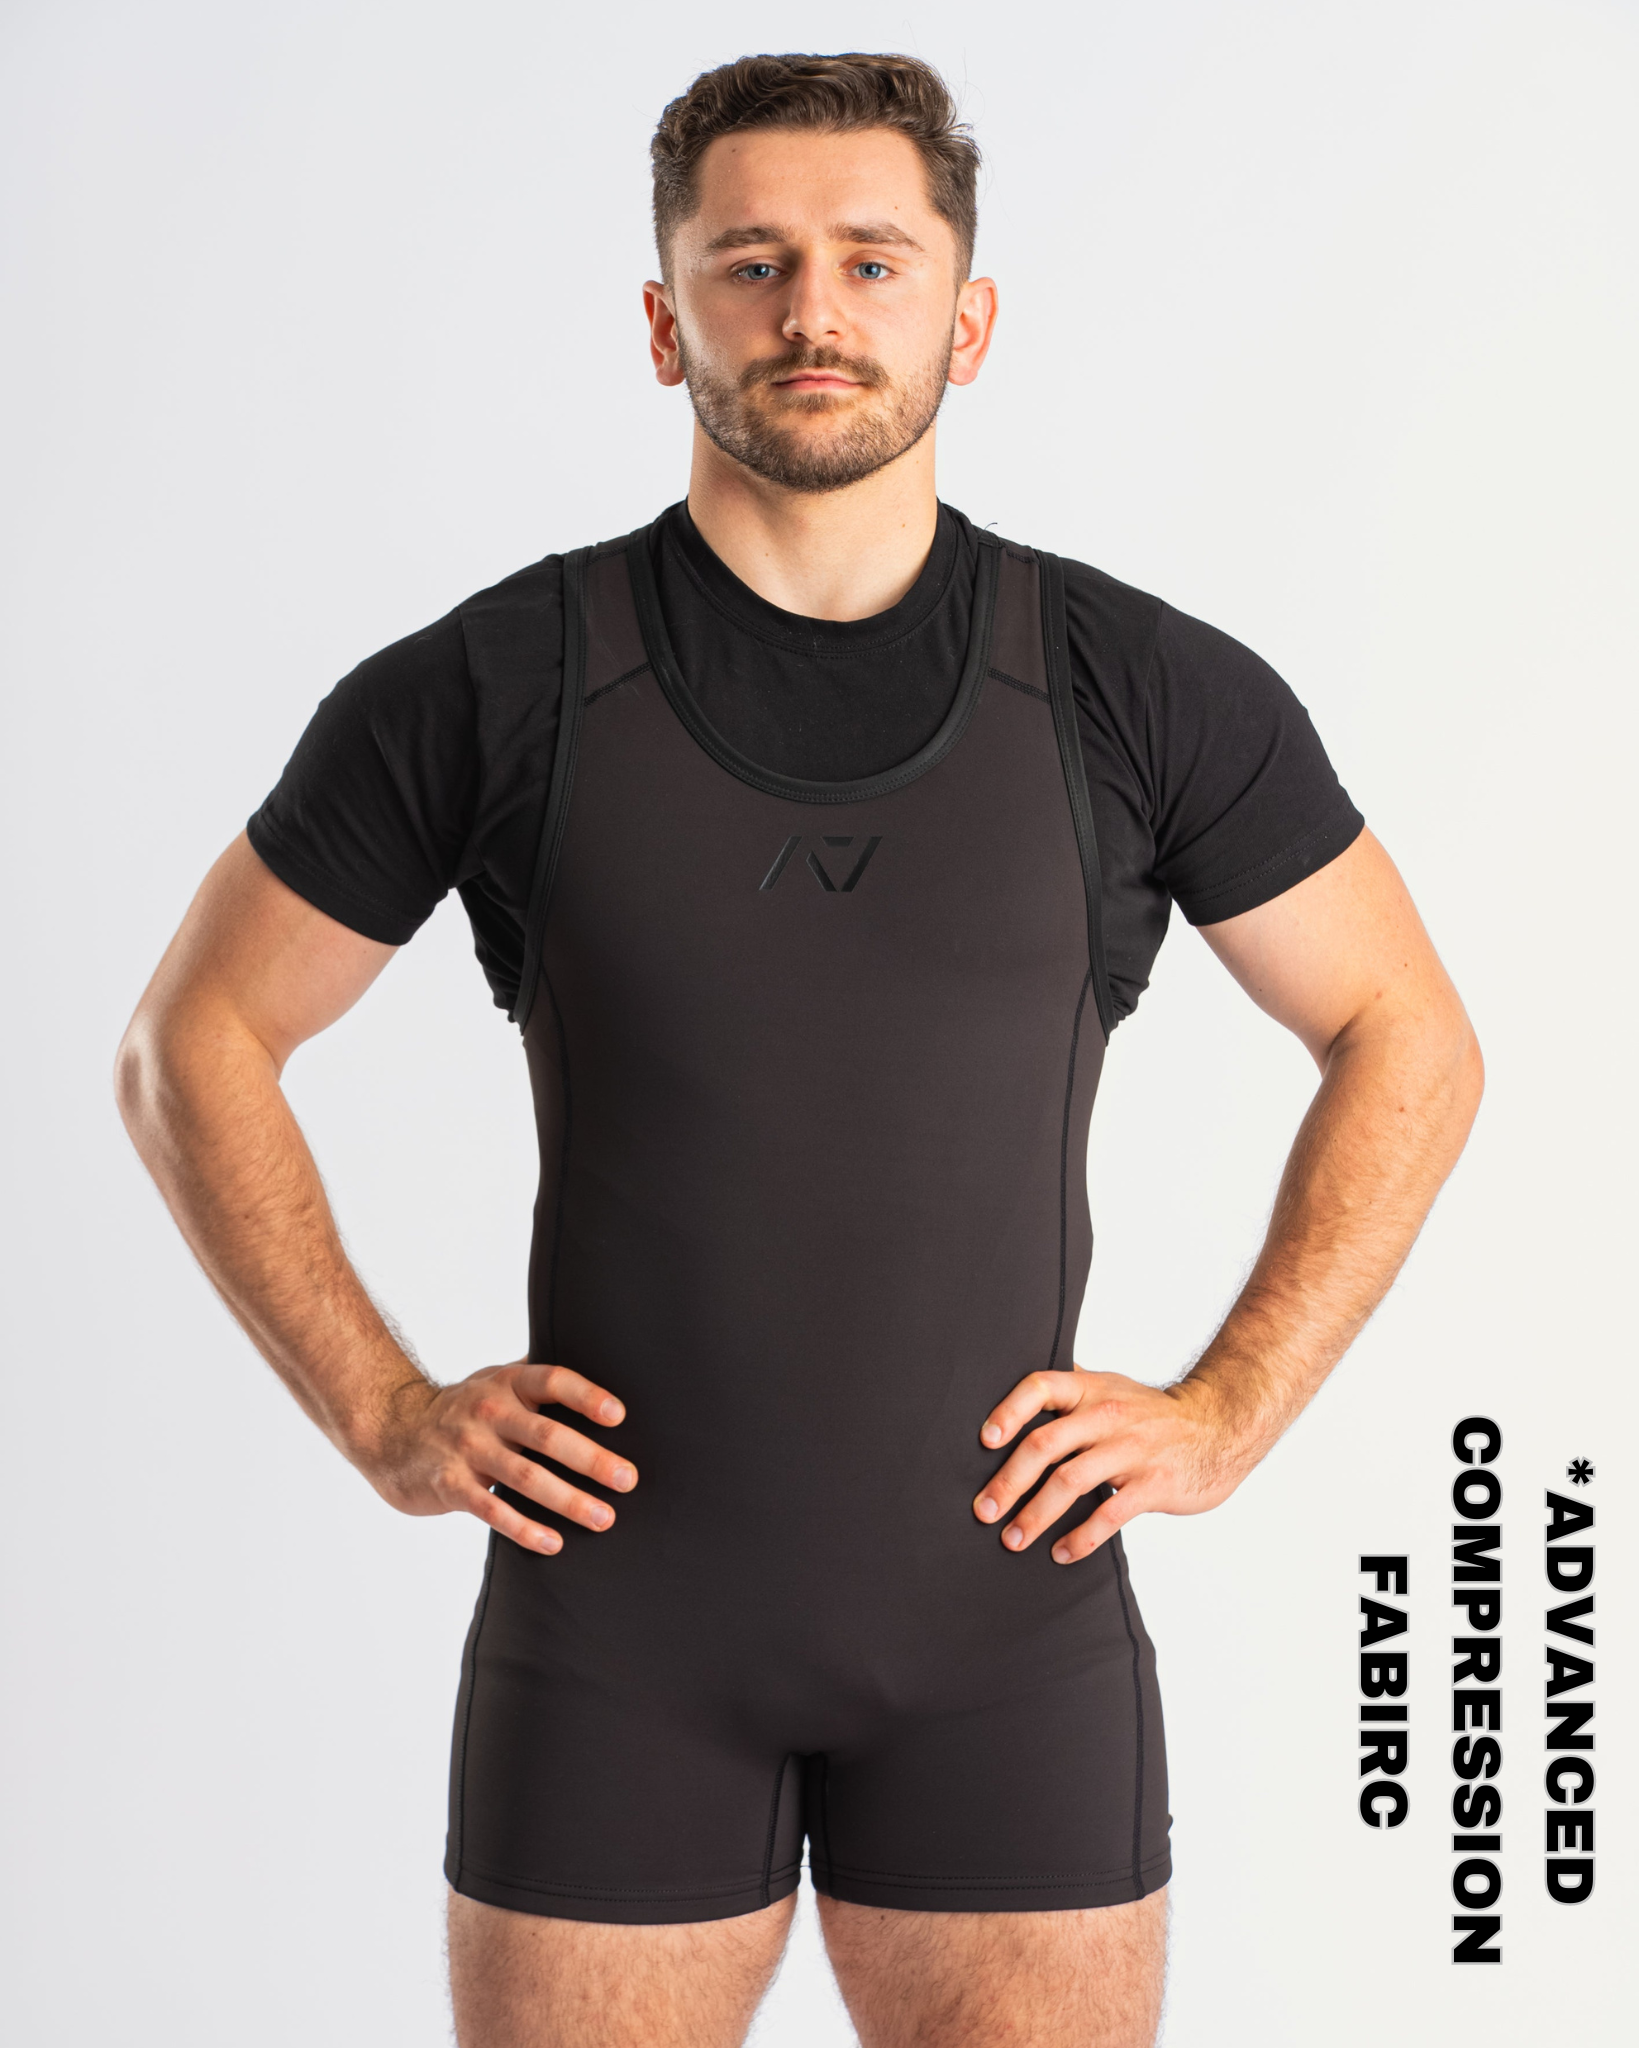 Our IPF APPROVED Rausch Singlets are designed to support the strength and power of an lifter.  A racerback design with advanced compression fabric provides powerlifters ultimate support whilst on the platform. IPF Approved Kit includes Rausch Powerlifting Singlet, A7 Meet Shirt, A7 Zebra Wrist Wraps, A7 Deadlift Socks, Hourglass Knee Sleeves (Stiff Knee Sleeves and Rigor Mortis Knee Sleeves). Genouill�res powerlifting shipping to France, Spain, Ireland, Germany, Italy, Sweden and EU.